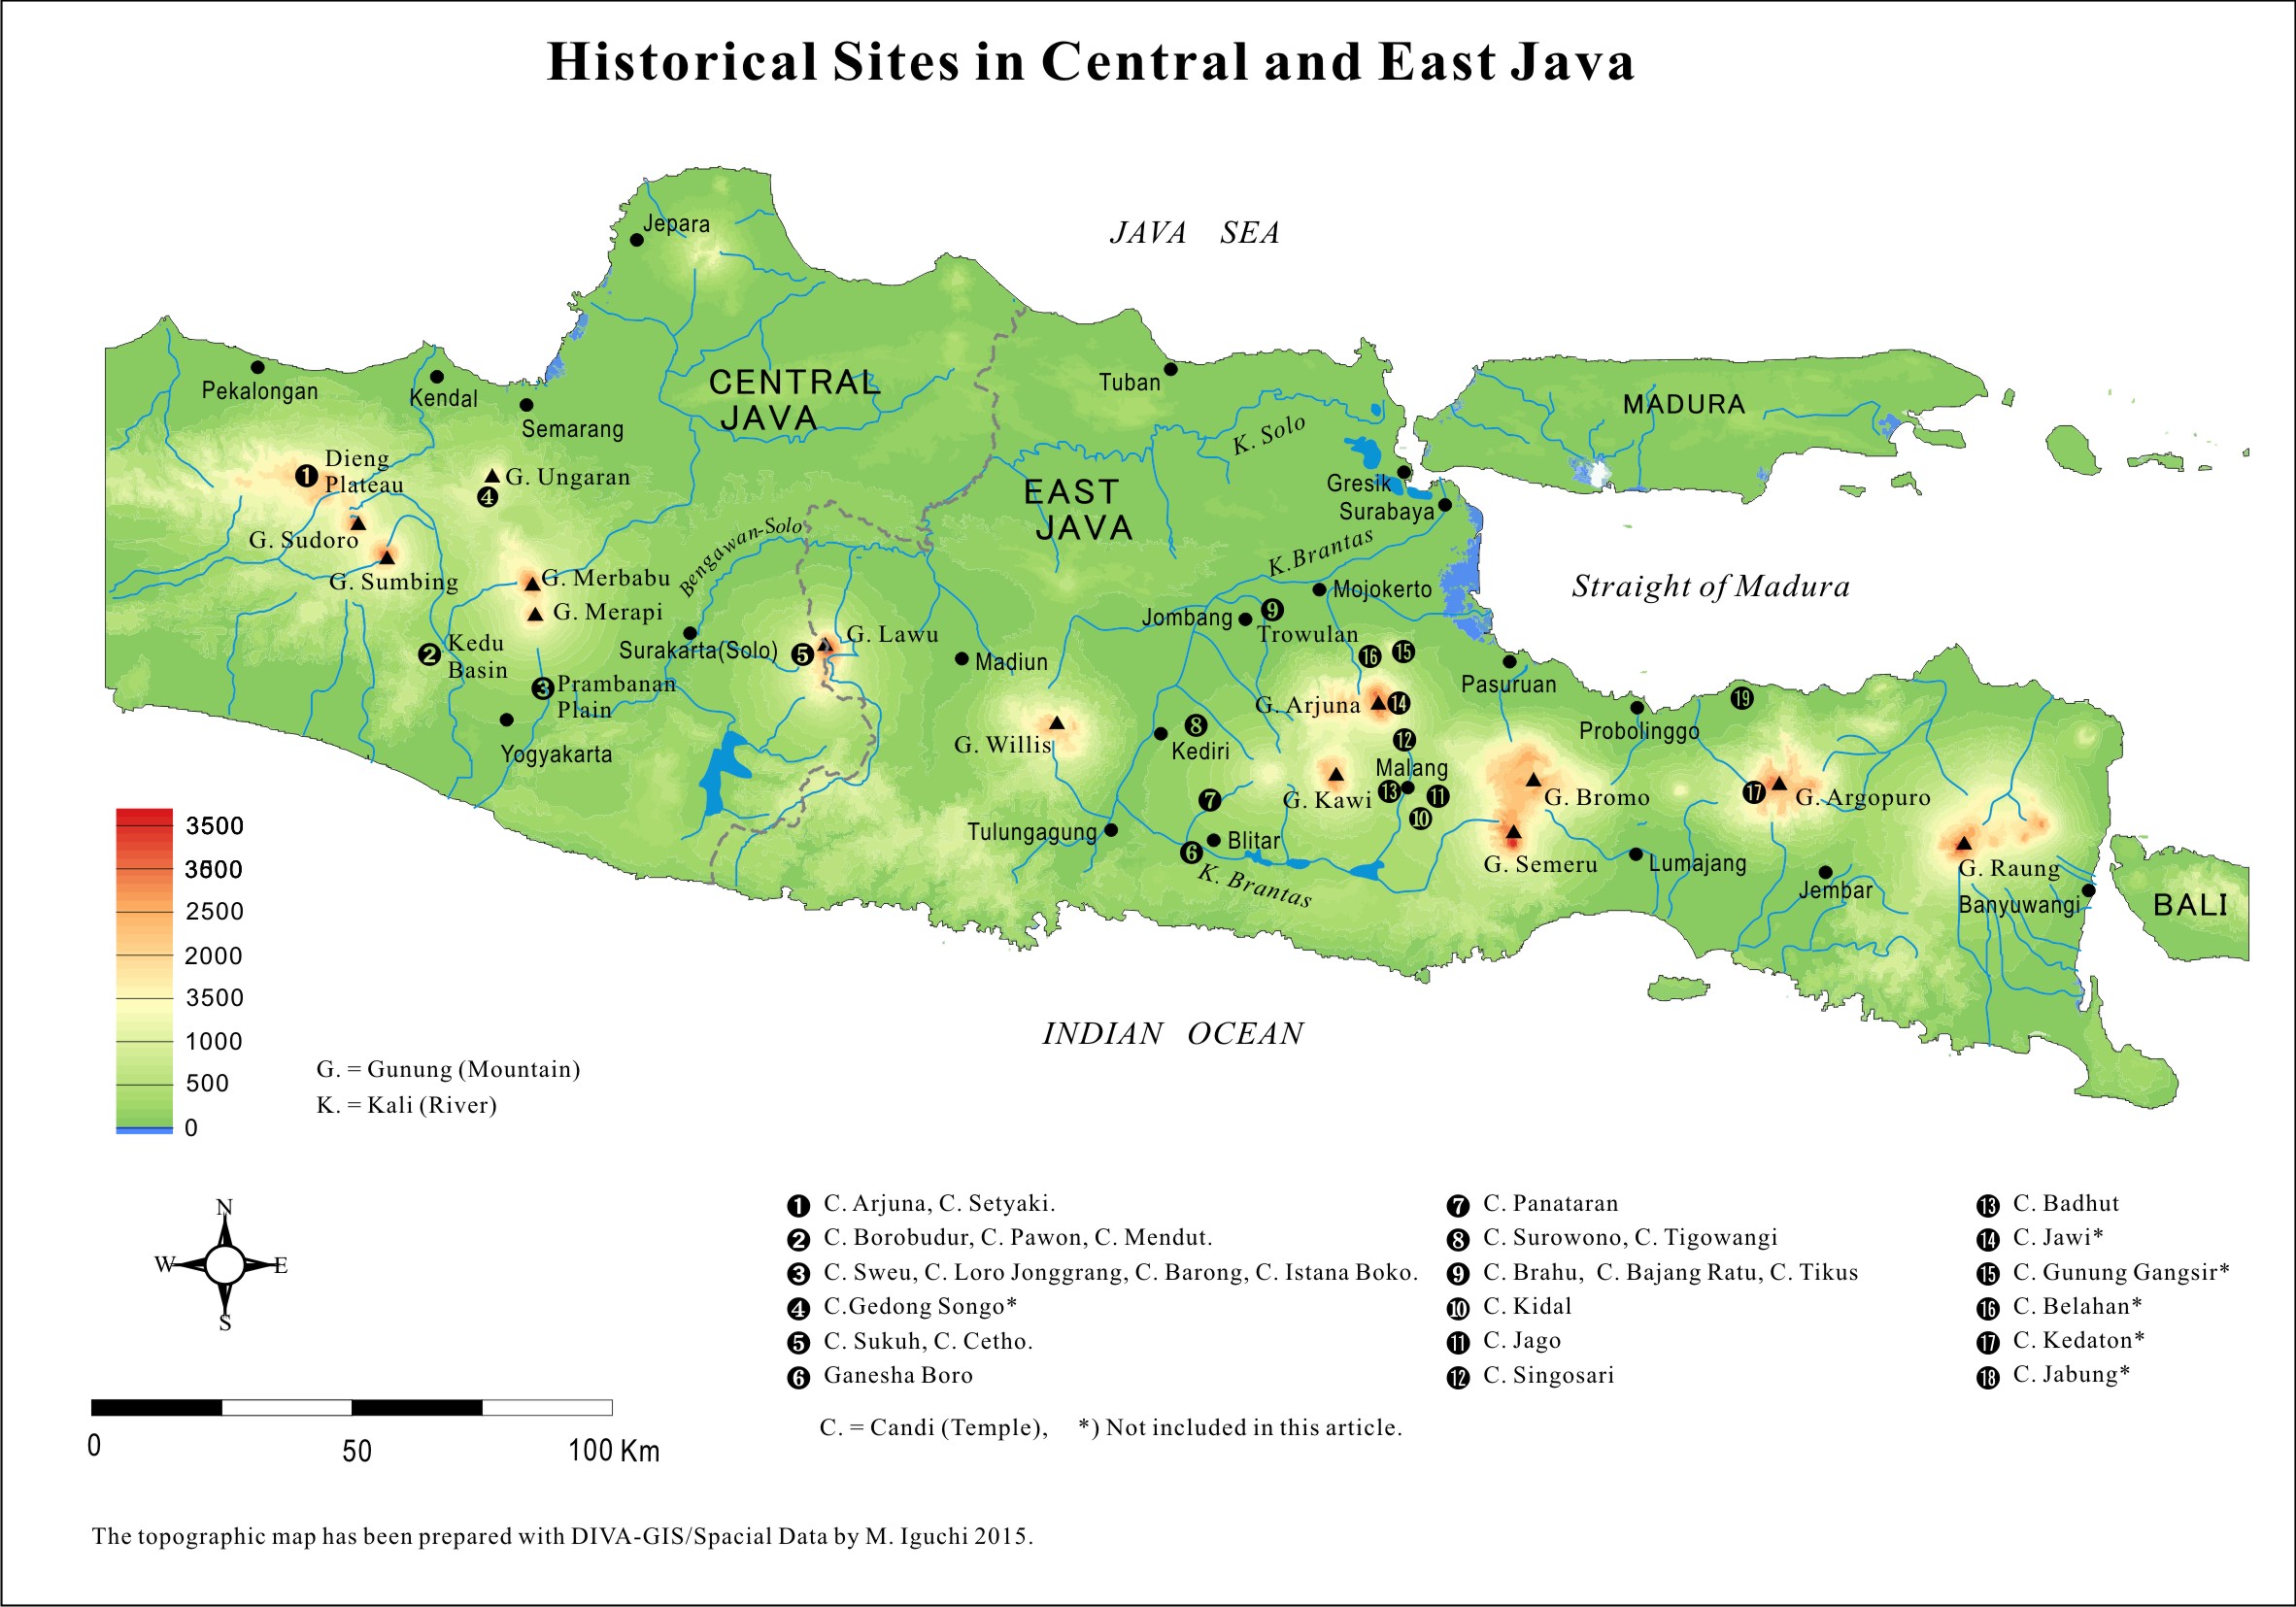 Historical sites in Central and East Java. Prepared with DIVA-GIS/Country Data/Indonesia  by M. Iguchi, February 2016